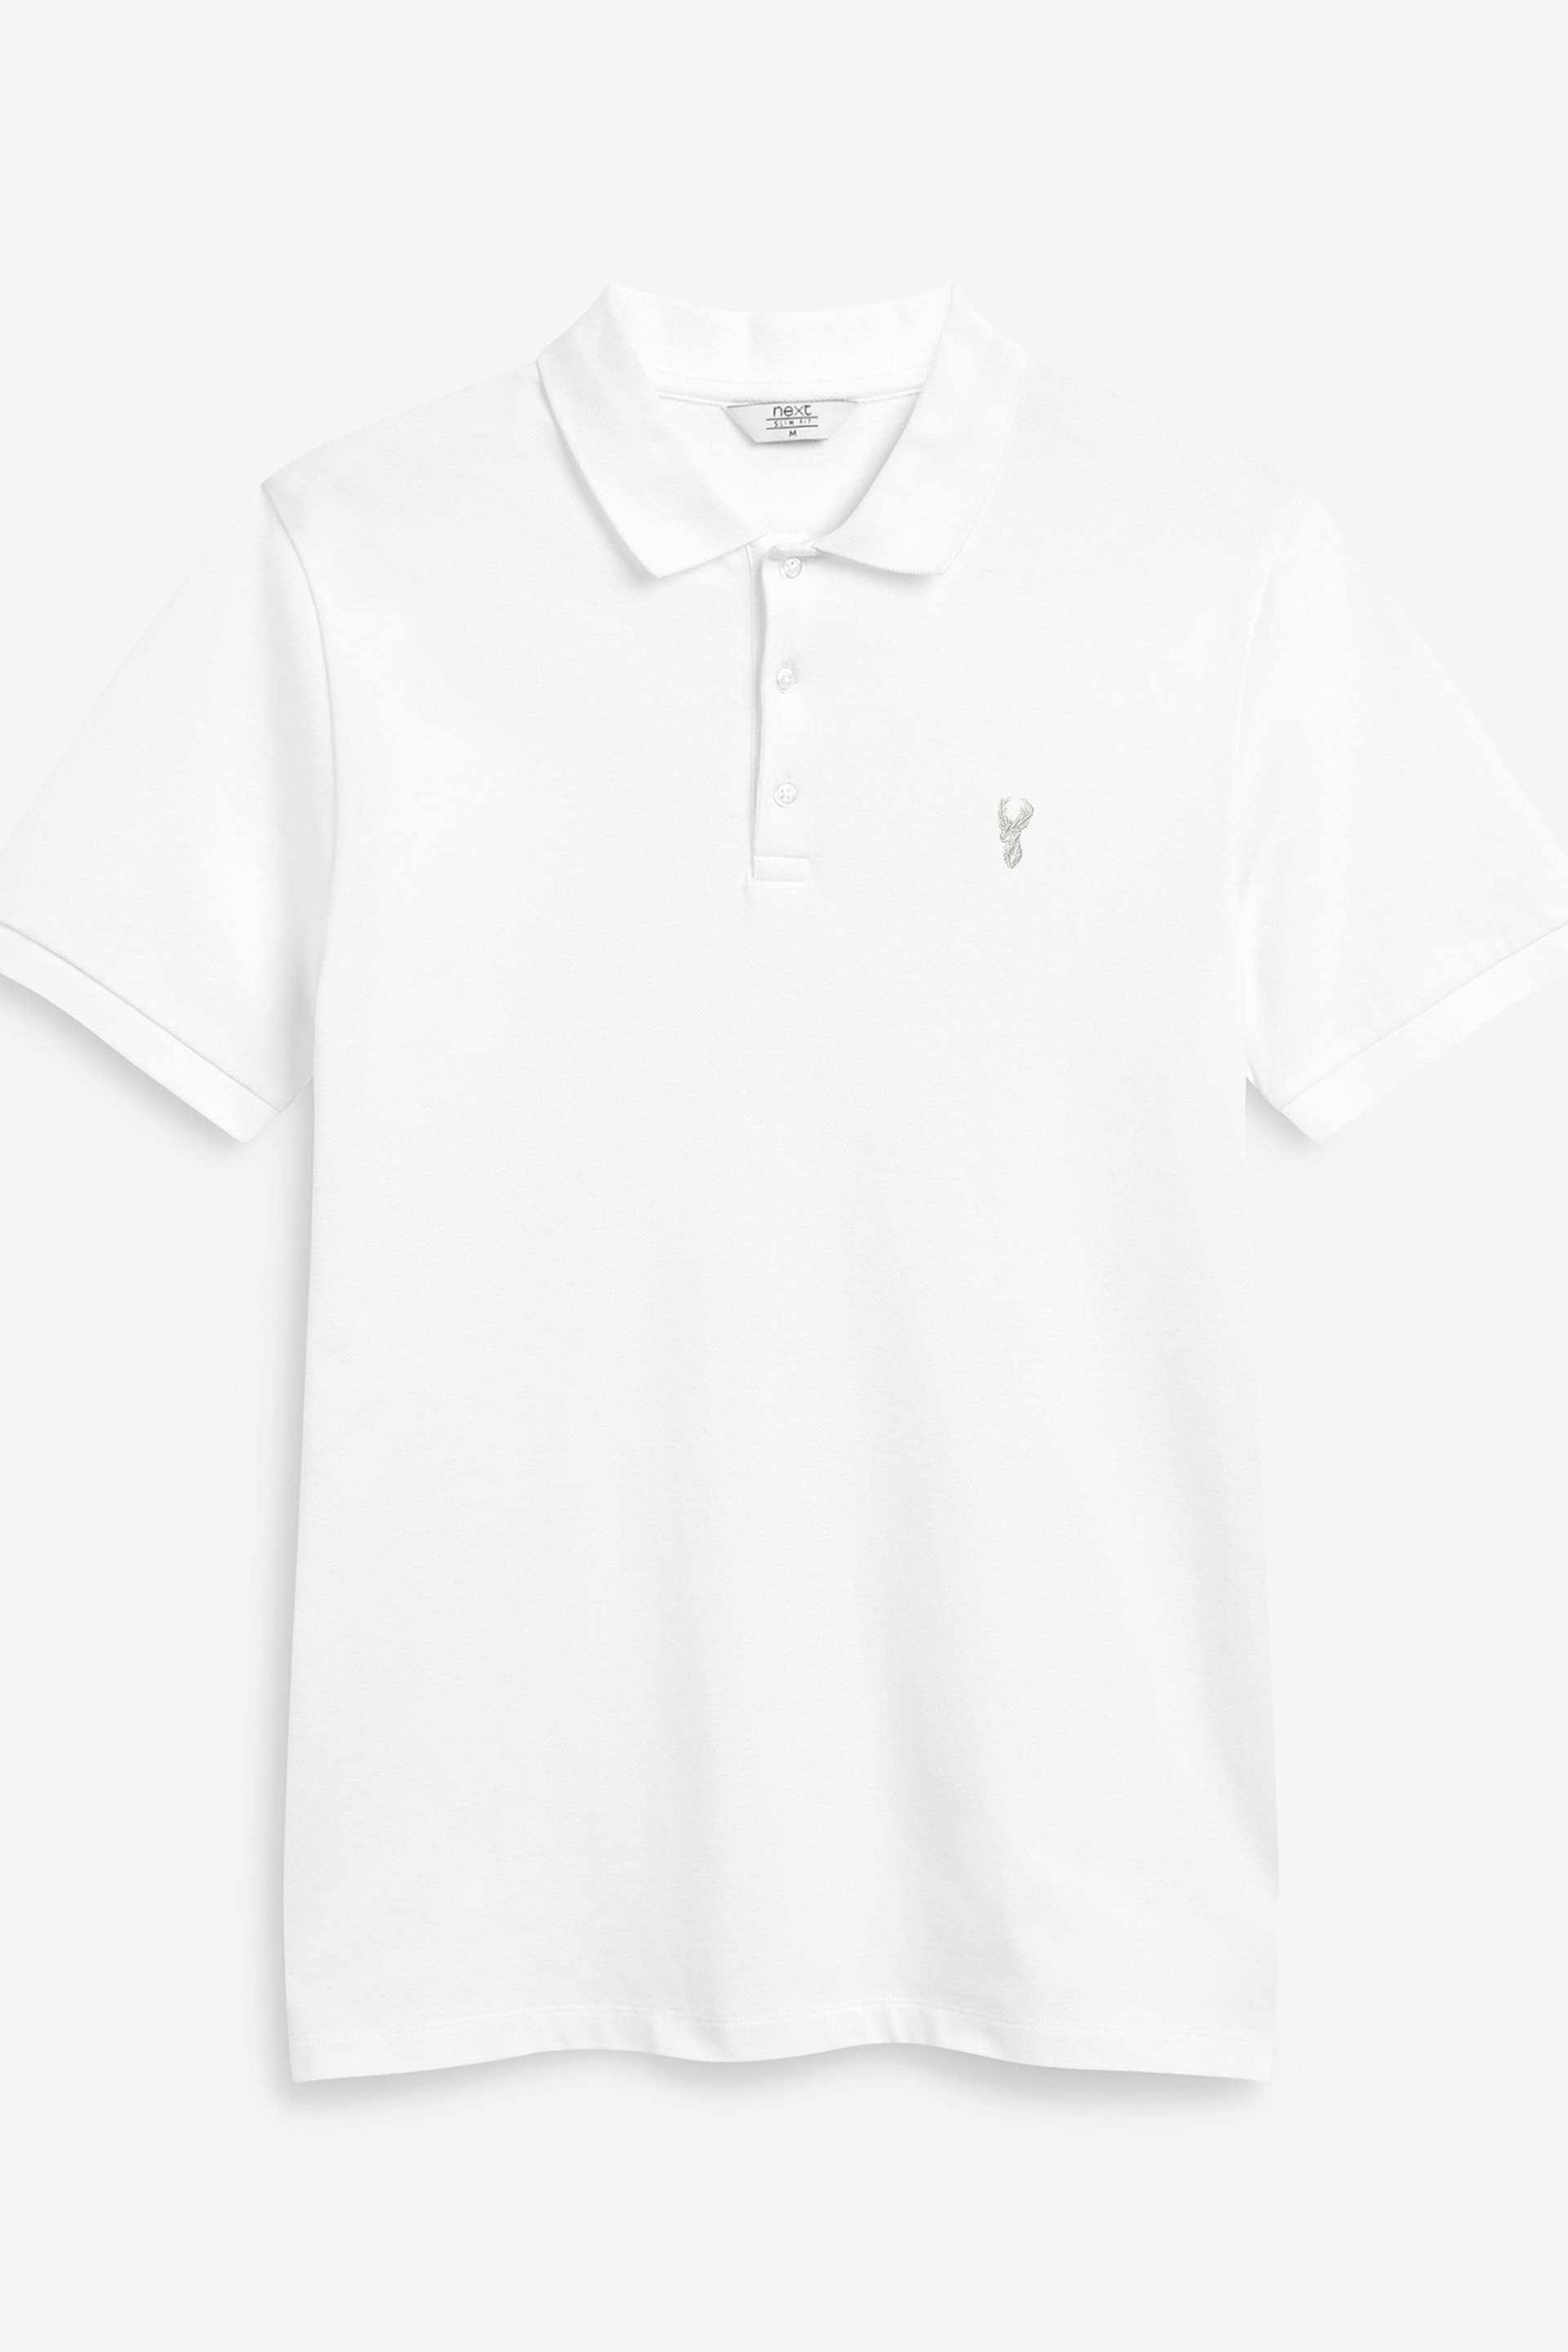 White Slim Fit Short Sleeve Pique Polo Shirt - Image 5 of 5